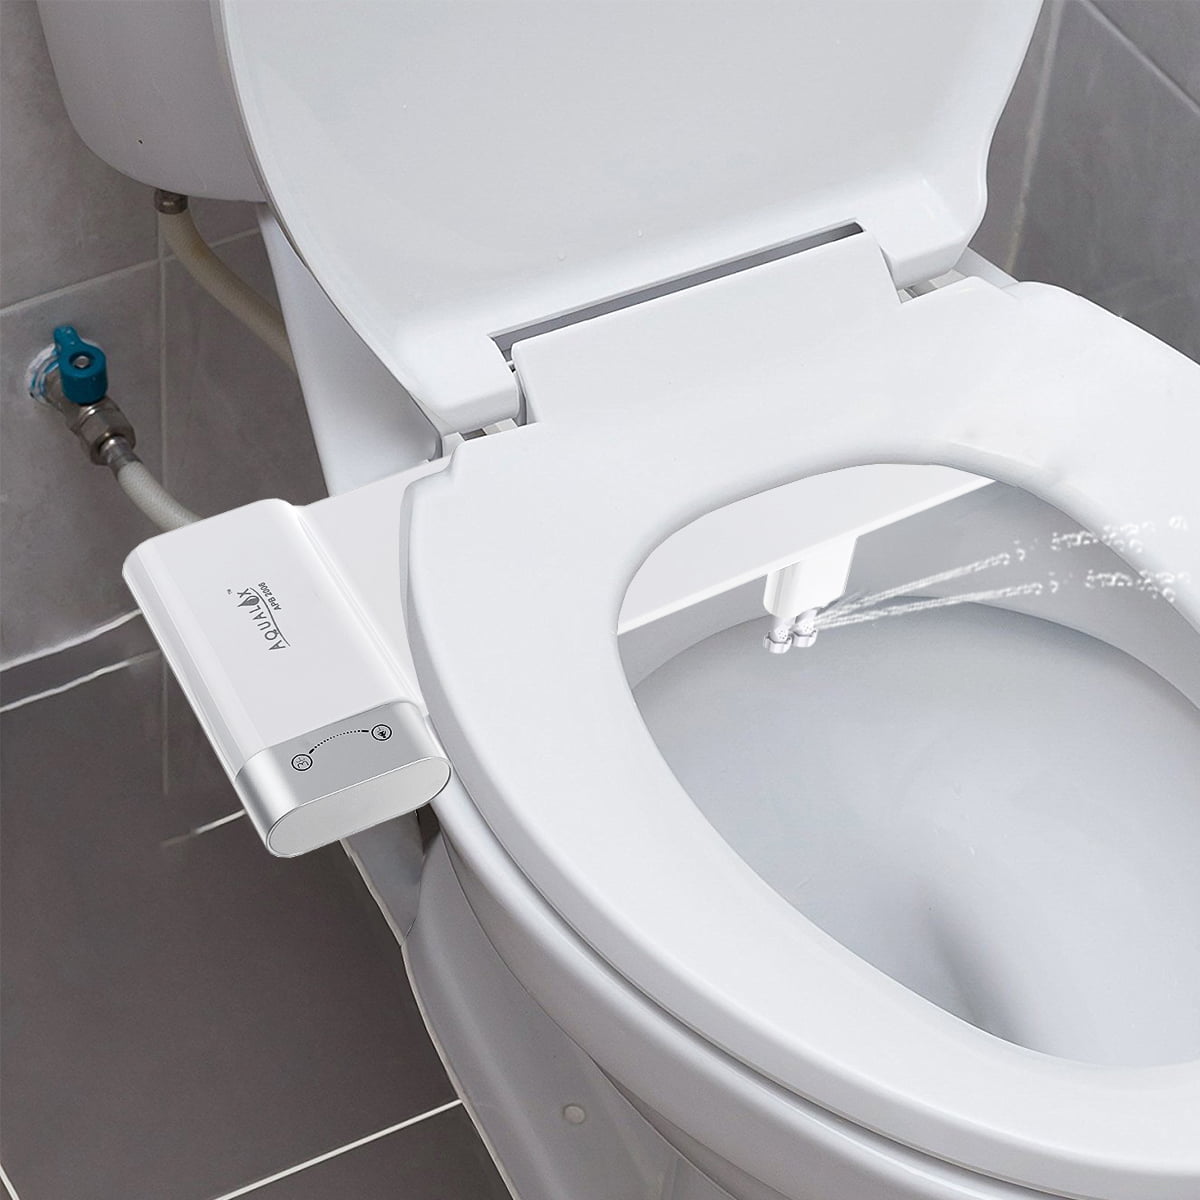 Water Spray Dual Nozzle Non-Electric Bidet Toilet Seat Attachment Self-Cleaning 